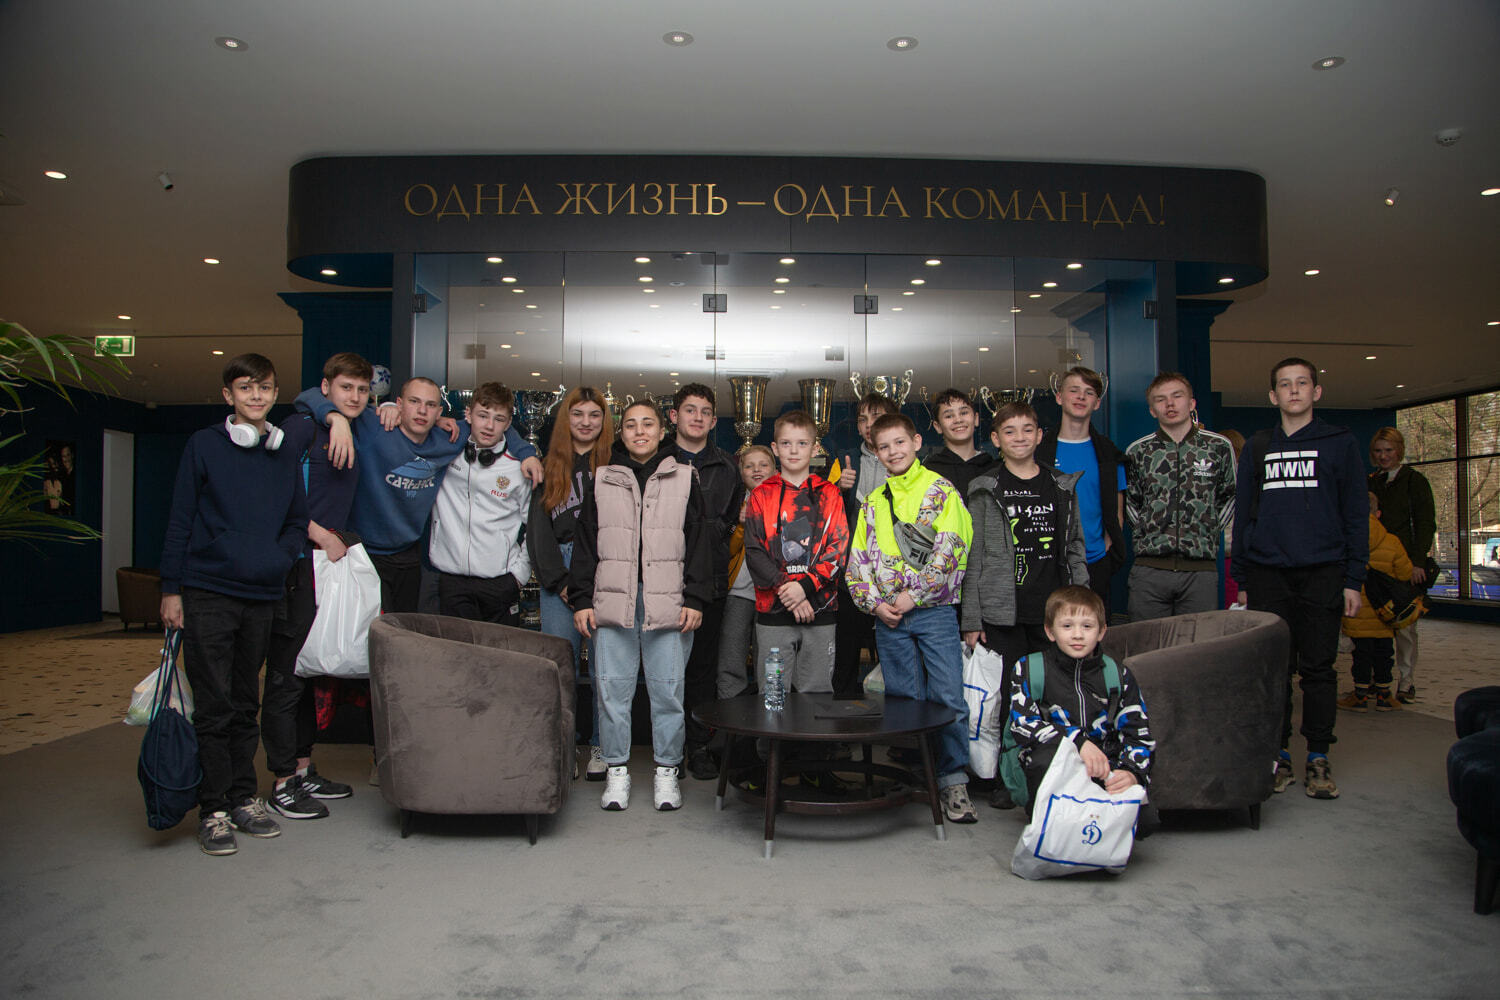 FC Dynamo Moscow News | Dynamo Day and VTB Bank at the Novogorsk base for children from the Ryazan region. Official Dynamo club website.